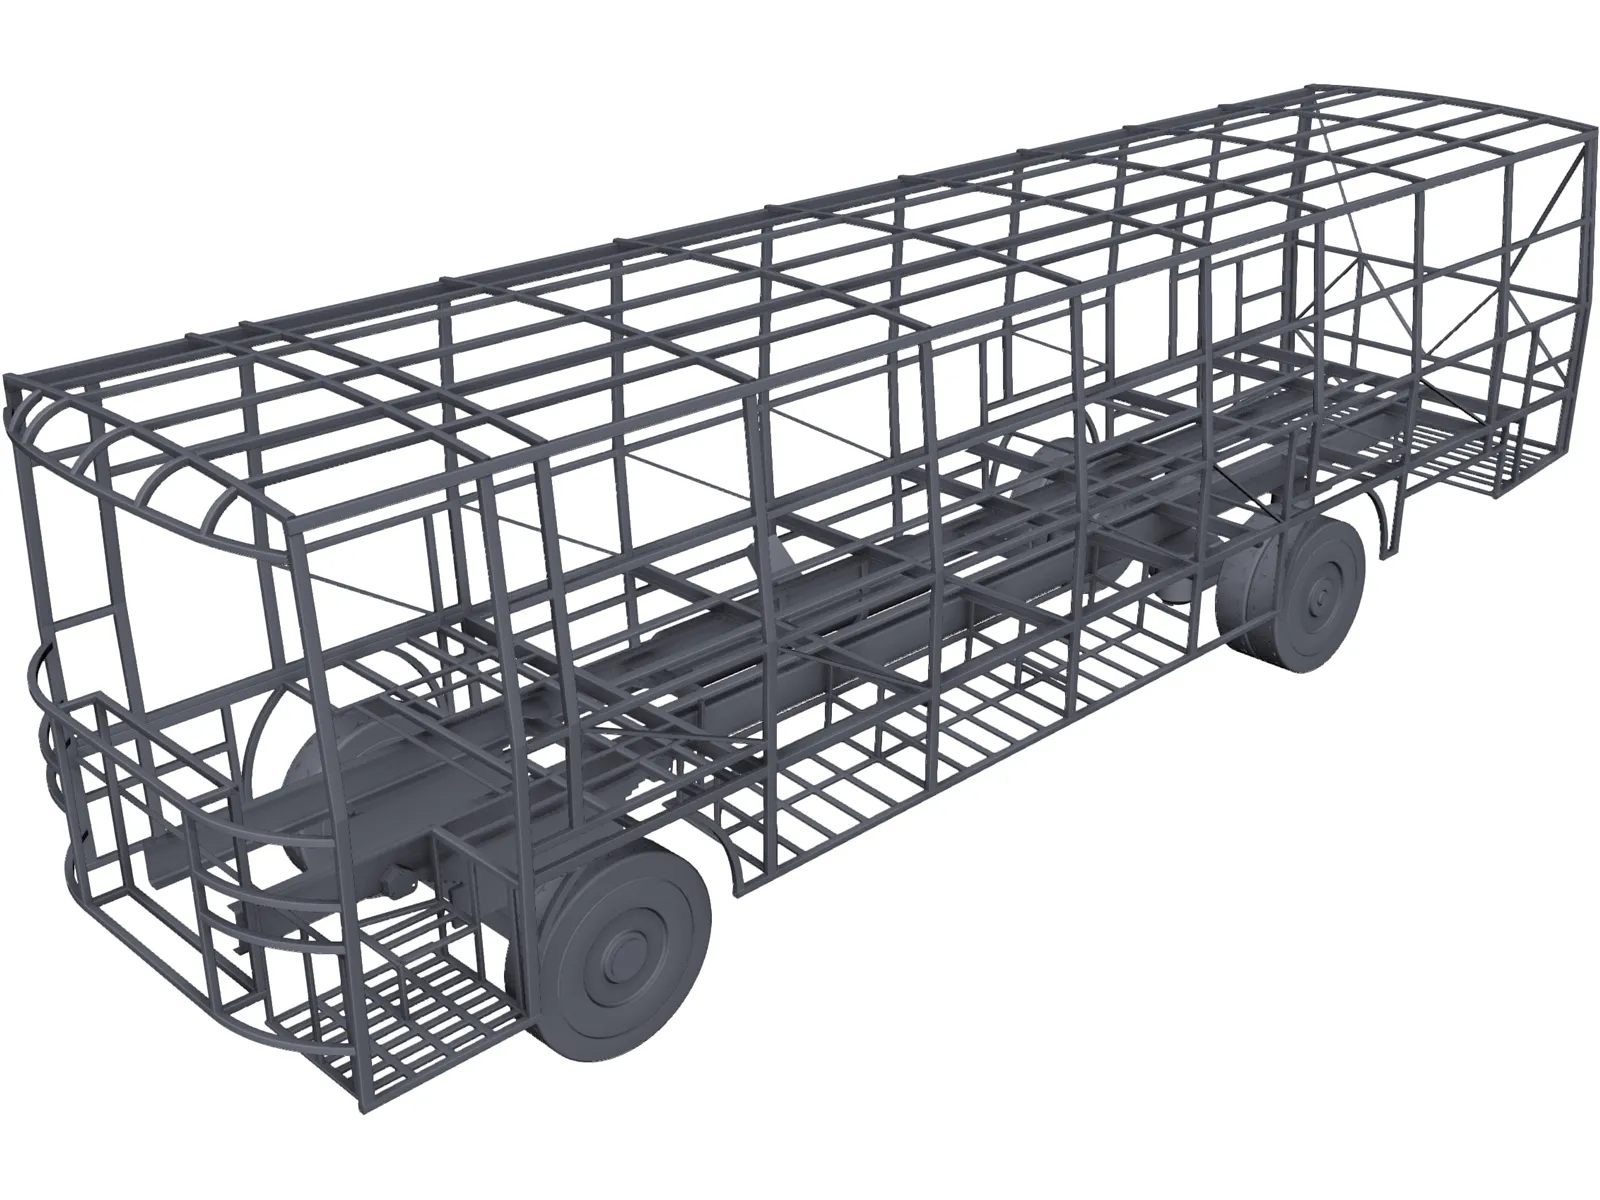 Bus Chassis 3D Model